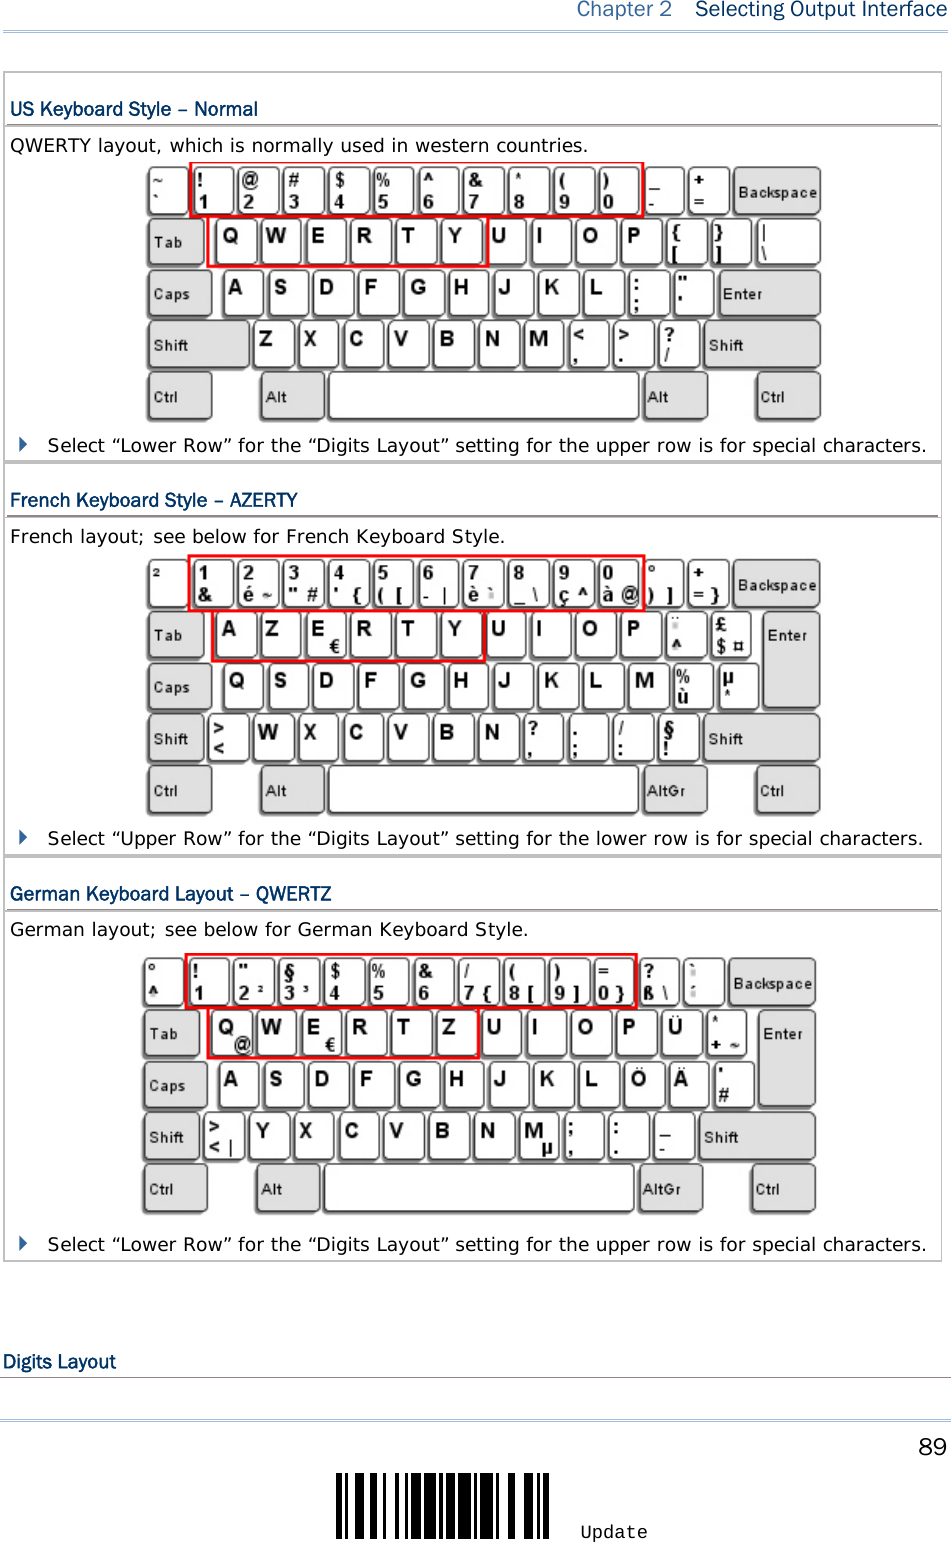     89 Update  Chapter 2   Selecting Output Interface US Keyboard Style – Normal QWERTY layout, which is normally used in western countries.                  Select “Lower Row” for the “Digits Layout” setting for the upper row is for special characters.  French Keyboard Style – AZERTY French layout; see below for French Keyboard Style.                  Select “Upper Row” for the “Digits Layout” setting for the lower row is for special characters.  German Keyboard Layout – QWERTZ German layout; see below for German Keyboard Style.                Select “Lower Row” for the “Digits Layout” setting for the upper row is for special characters.     Digits Layout 